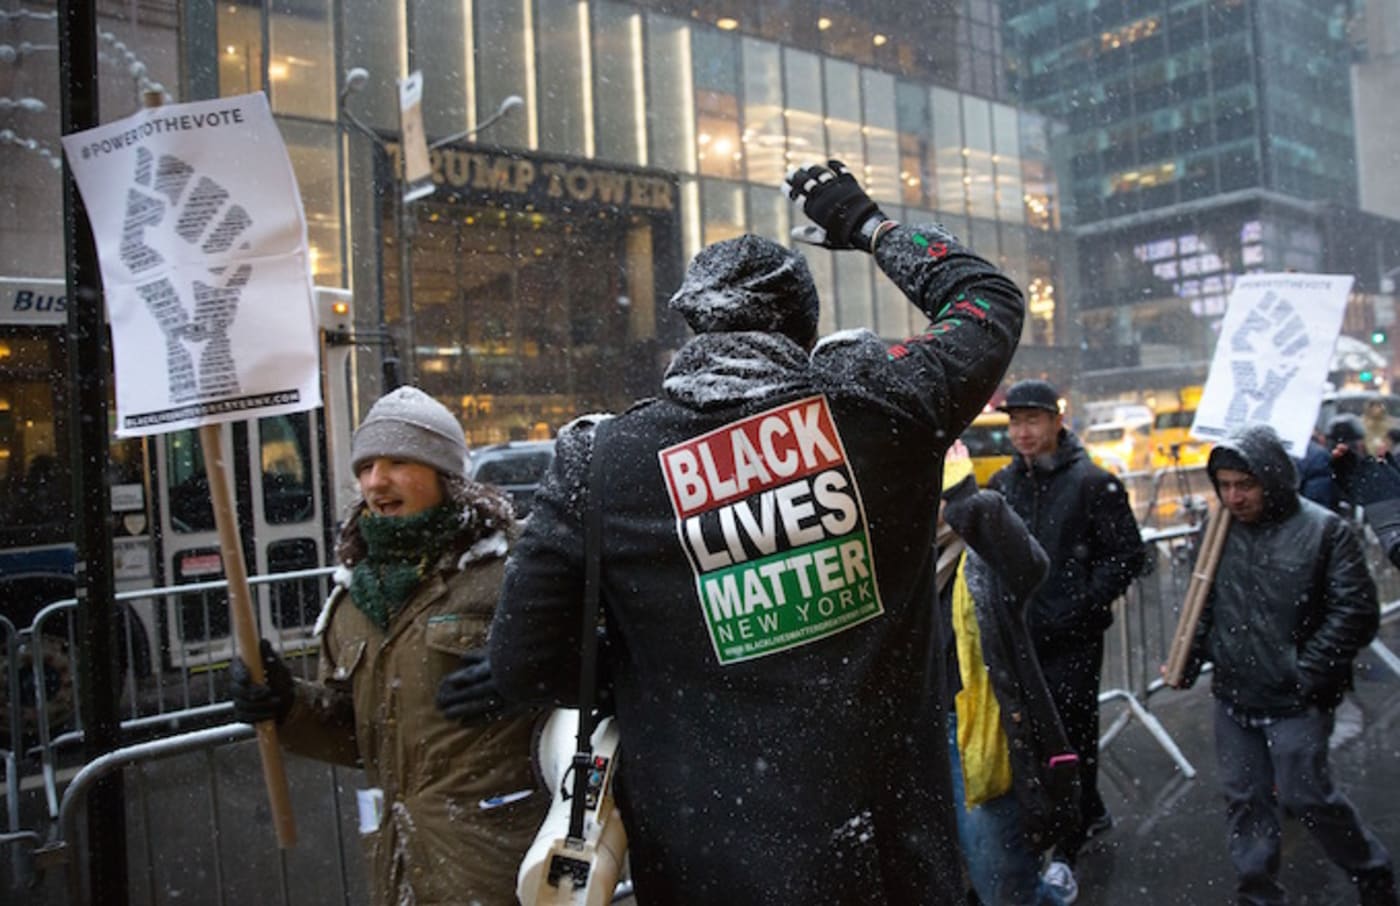 Black Lives Matter activists march in front of Trump Tower